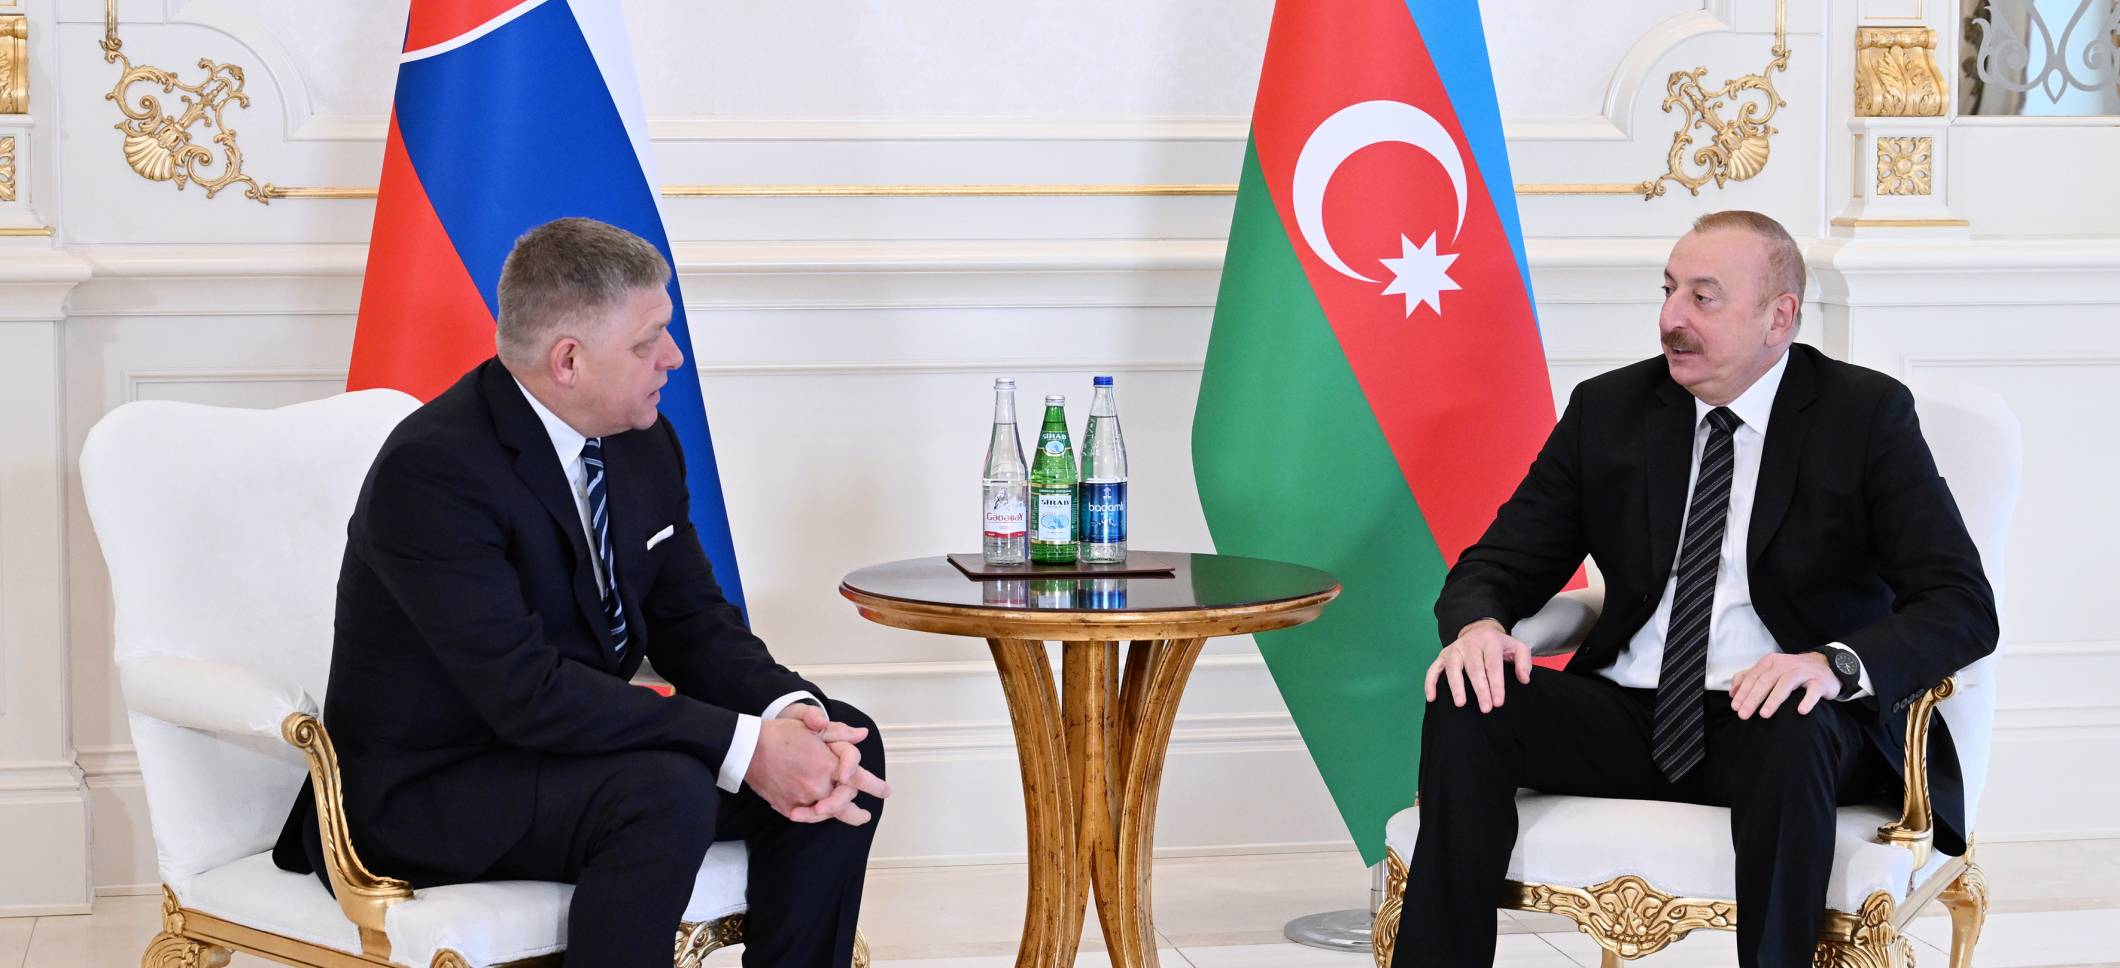 Ilham Aliyev held one-on-one meeting with Prime Minister of Slovakia